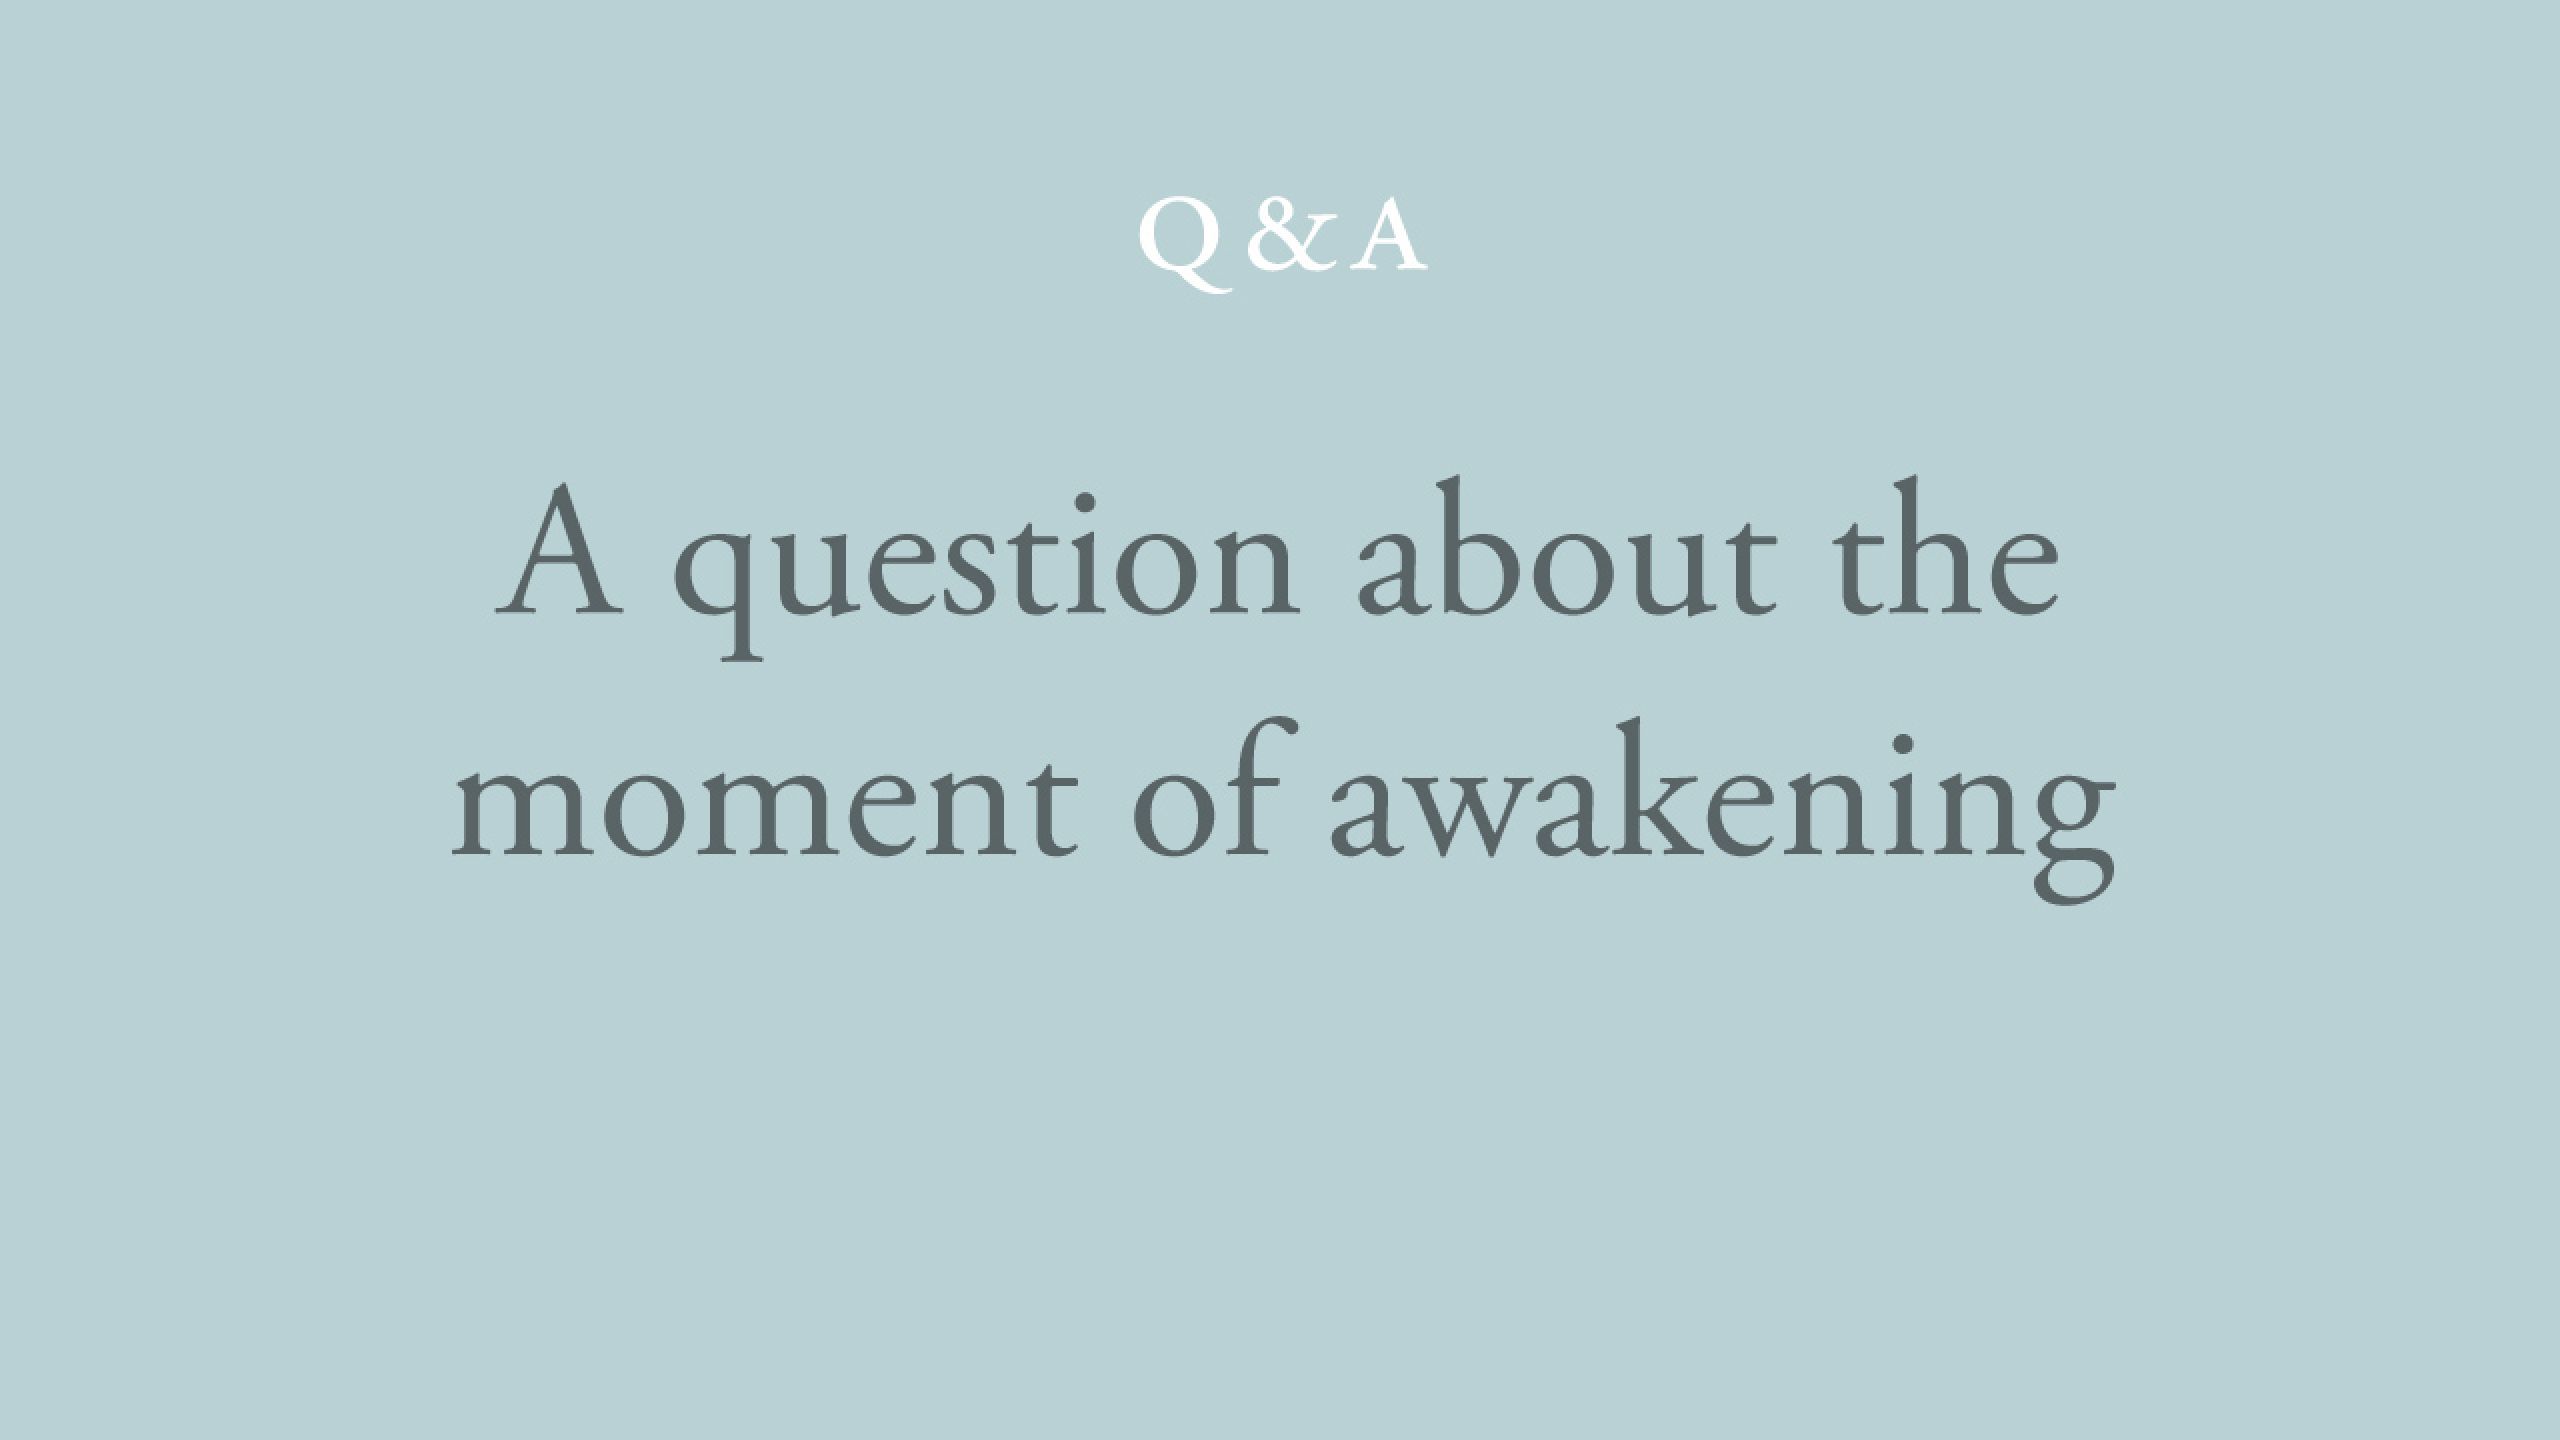 How did you feel at the moment of your awakening?